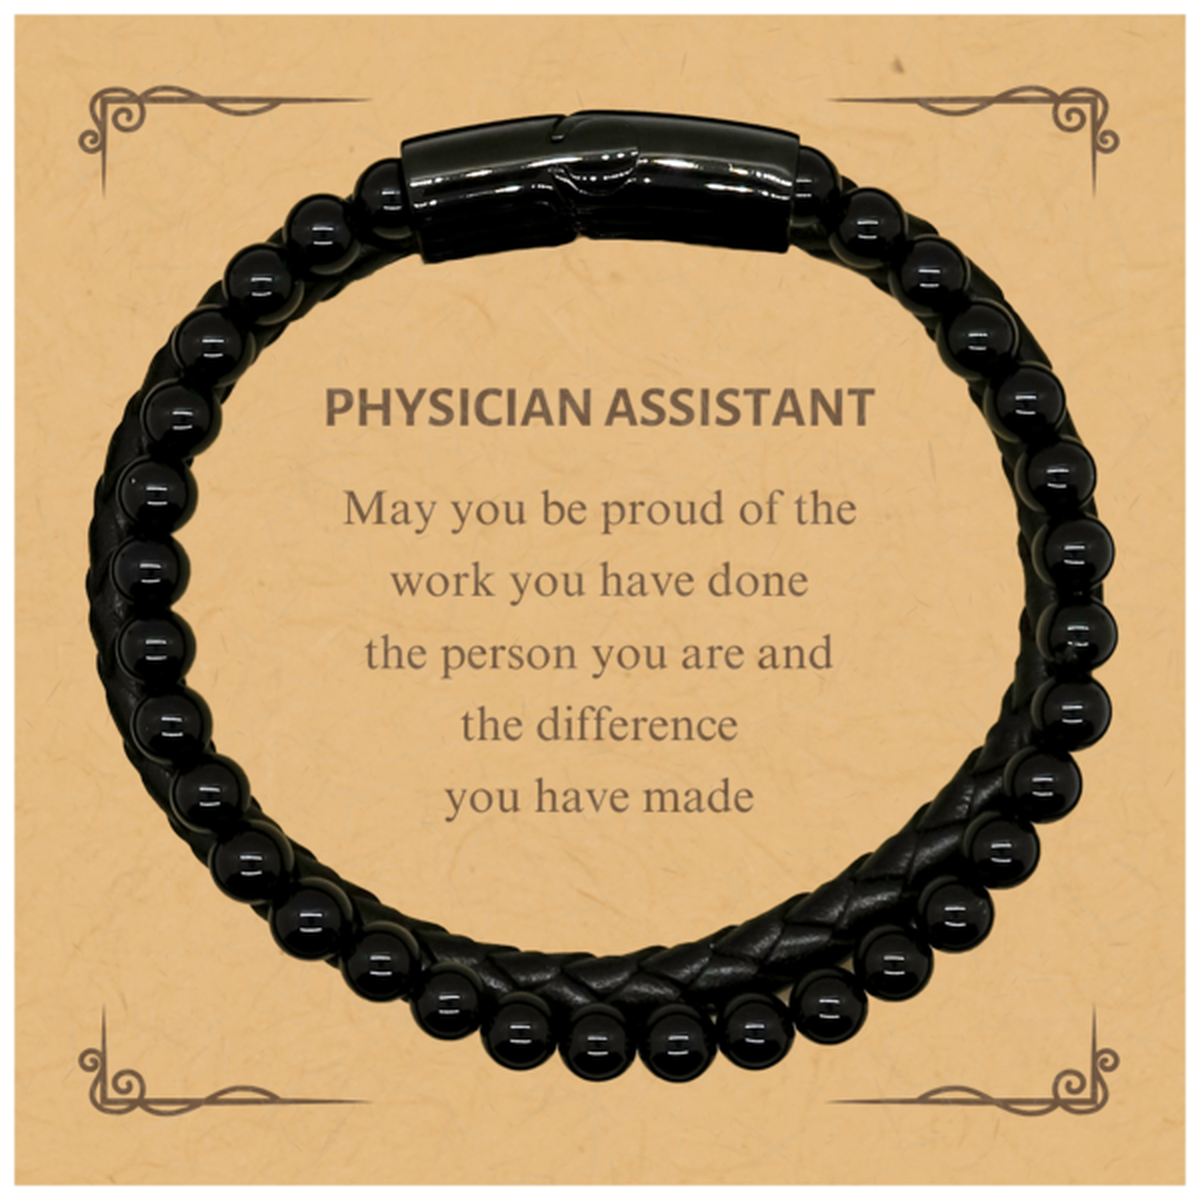 Physician Assistant May you be proud of the work you have done, Retirement Physician Assistant Stone Leather Bracelets for Colleague Appreciation Gifts Amazing for Physician Assistant